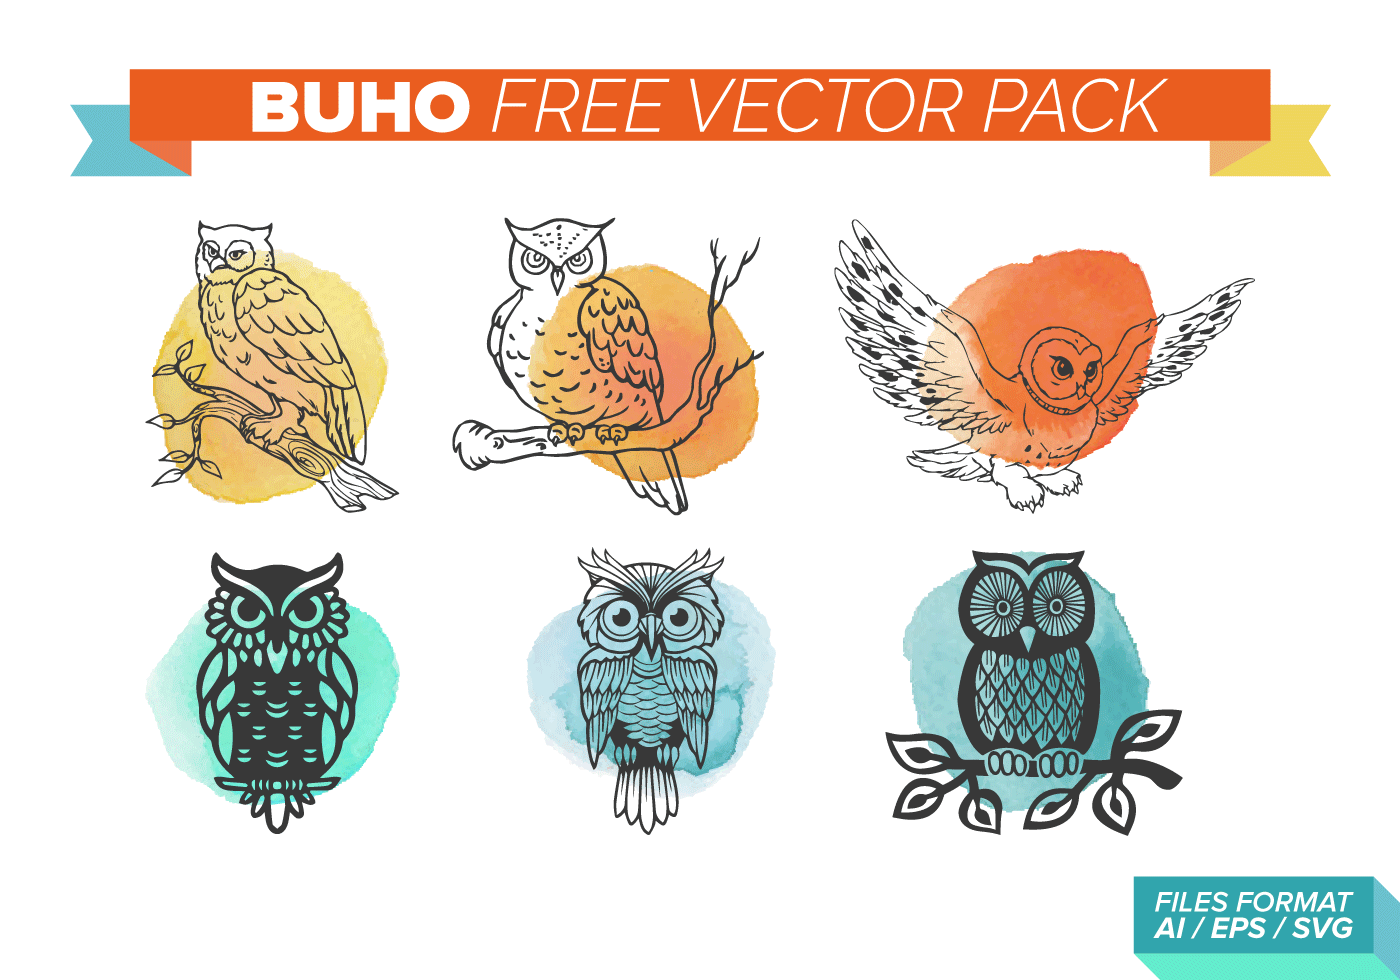 Download Buho Free Vector Pack - Download Free Vectors, Clipart ...